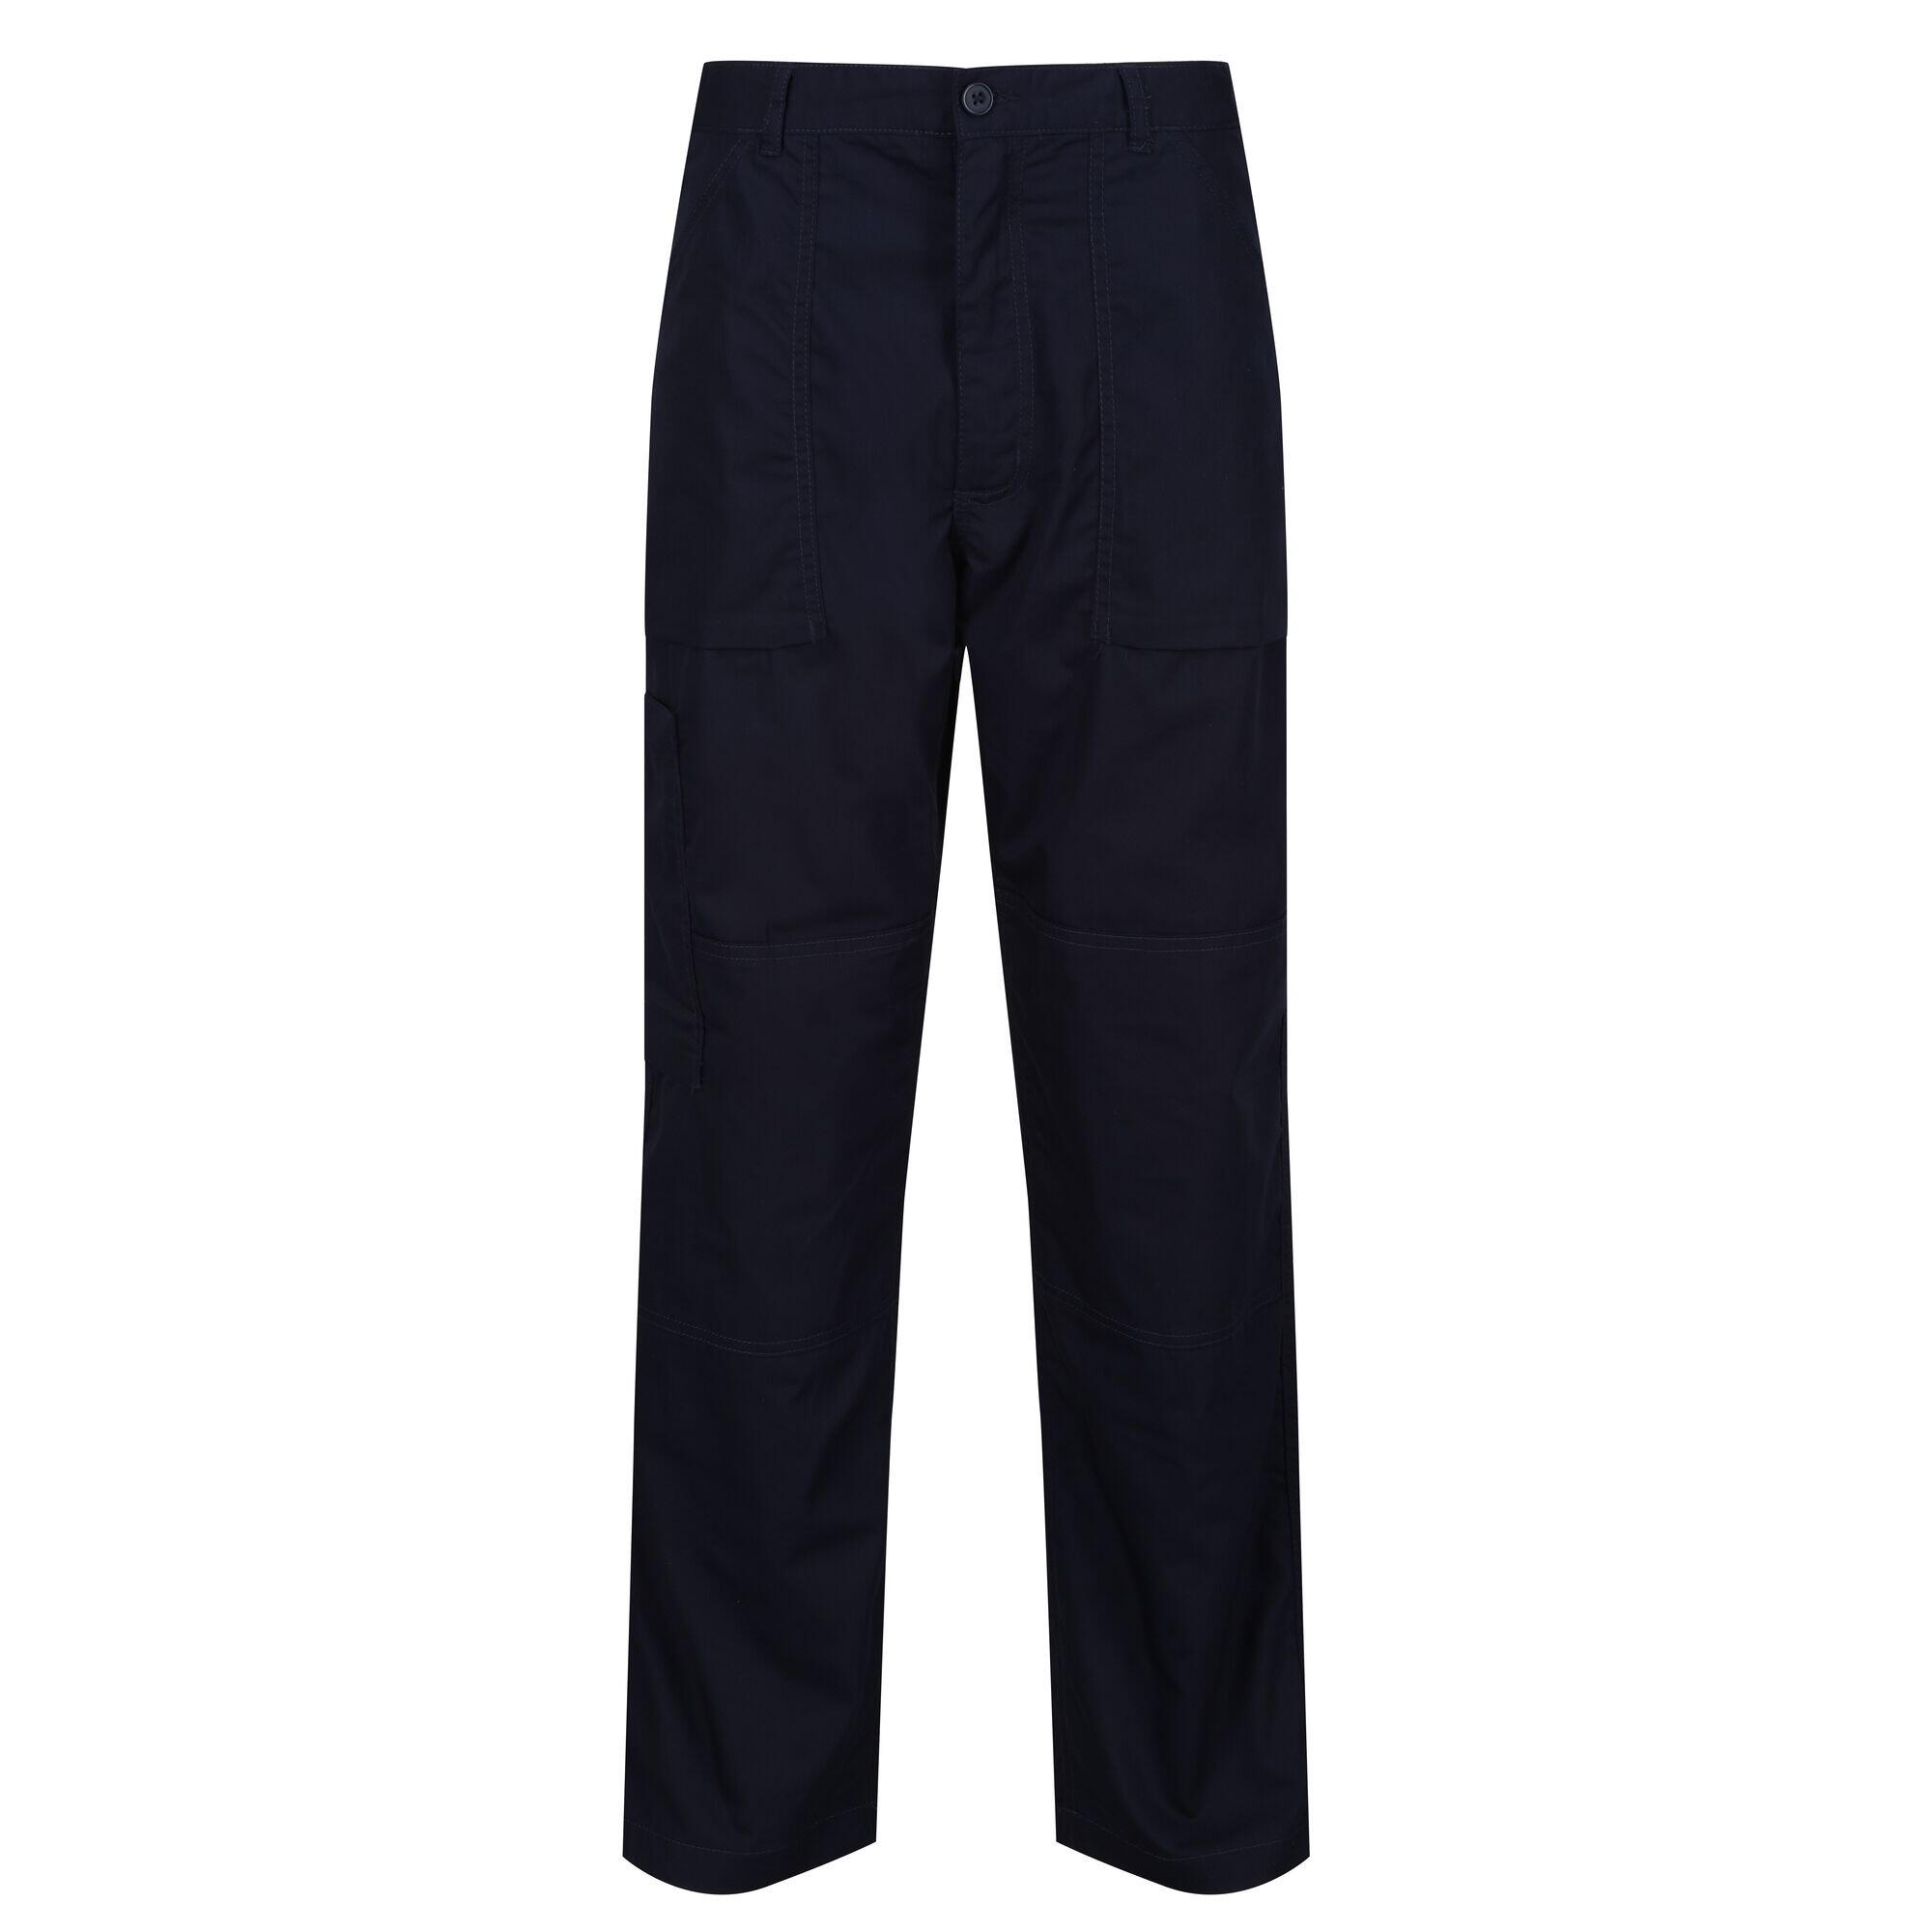 Mens Sports New Lined Action Trousers (Navy) 1/4